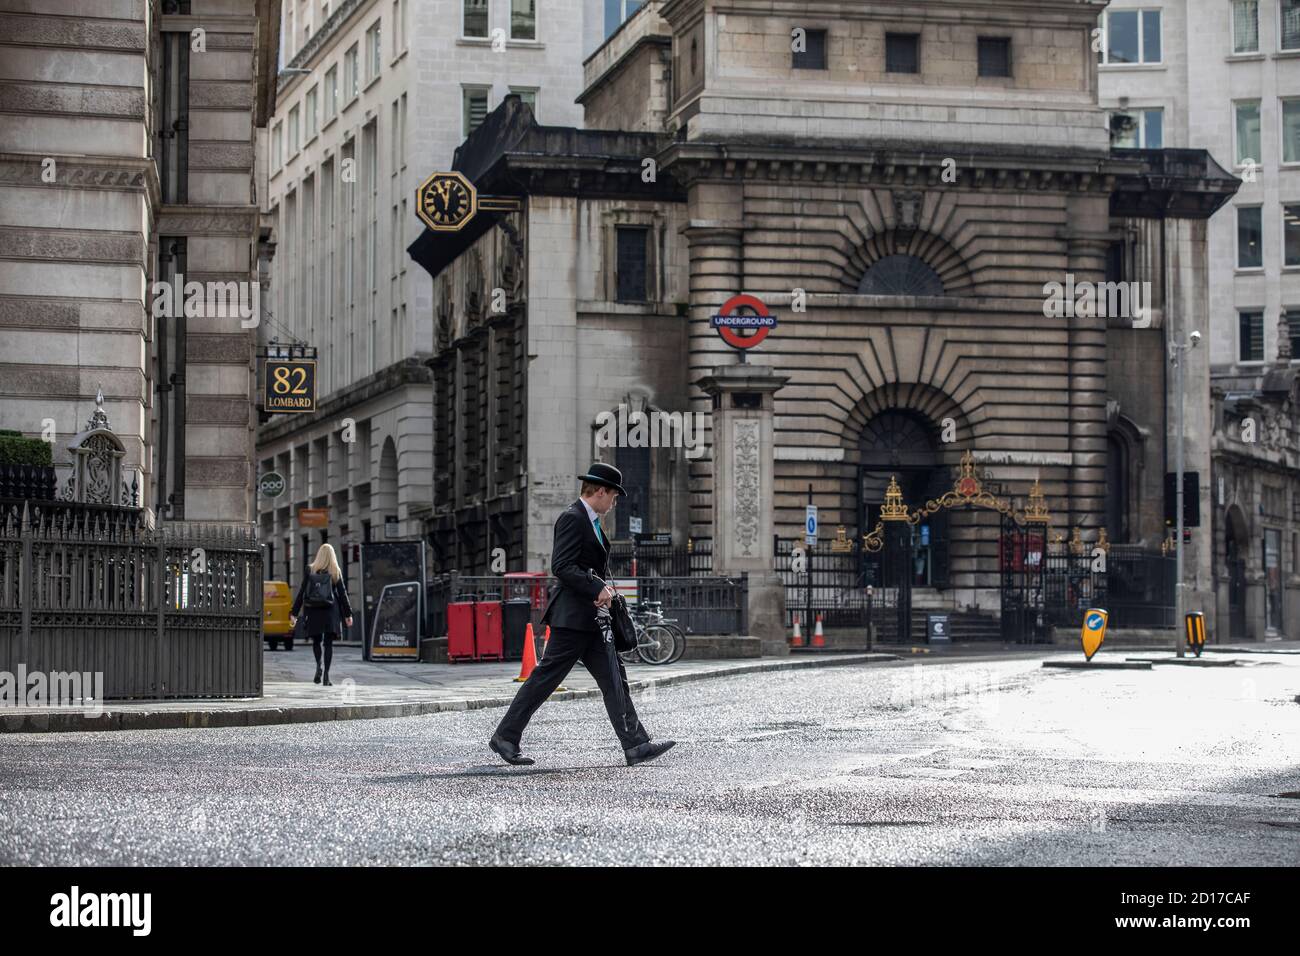 Worker wearing bowler hat carrying an umbrella makes his way across Lombard Street in the financial district of City of London, England, UK Stock Photo